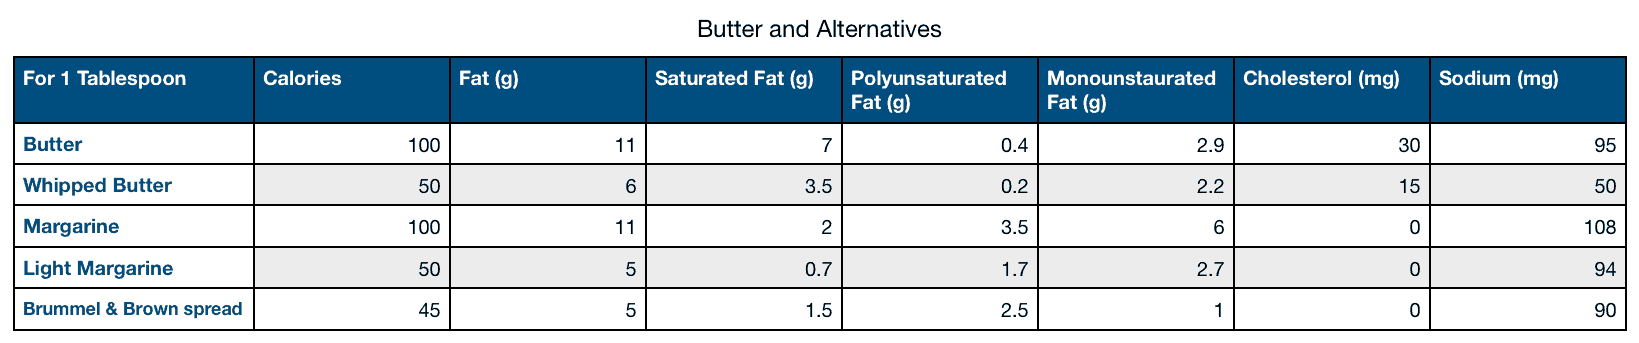 Butter and Alternatives